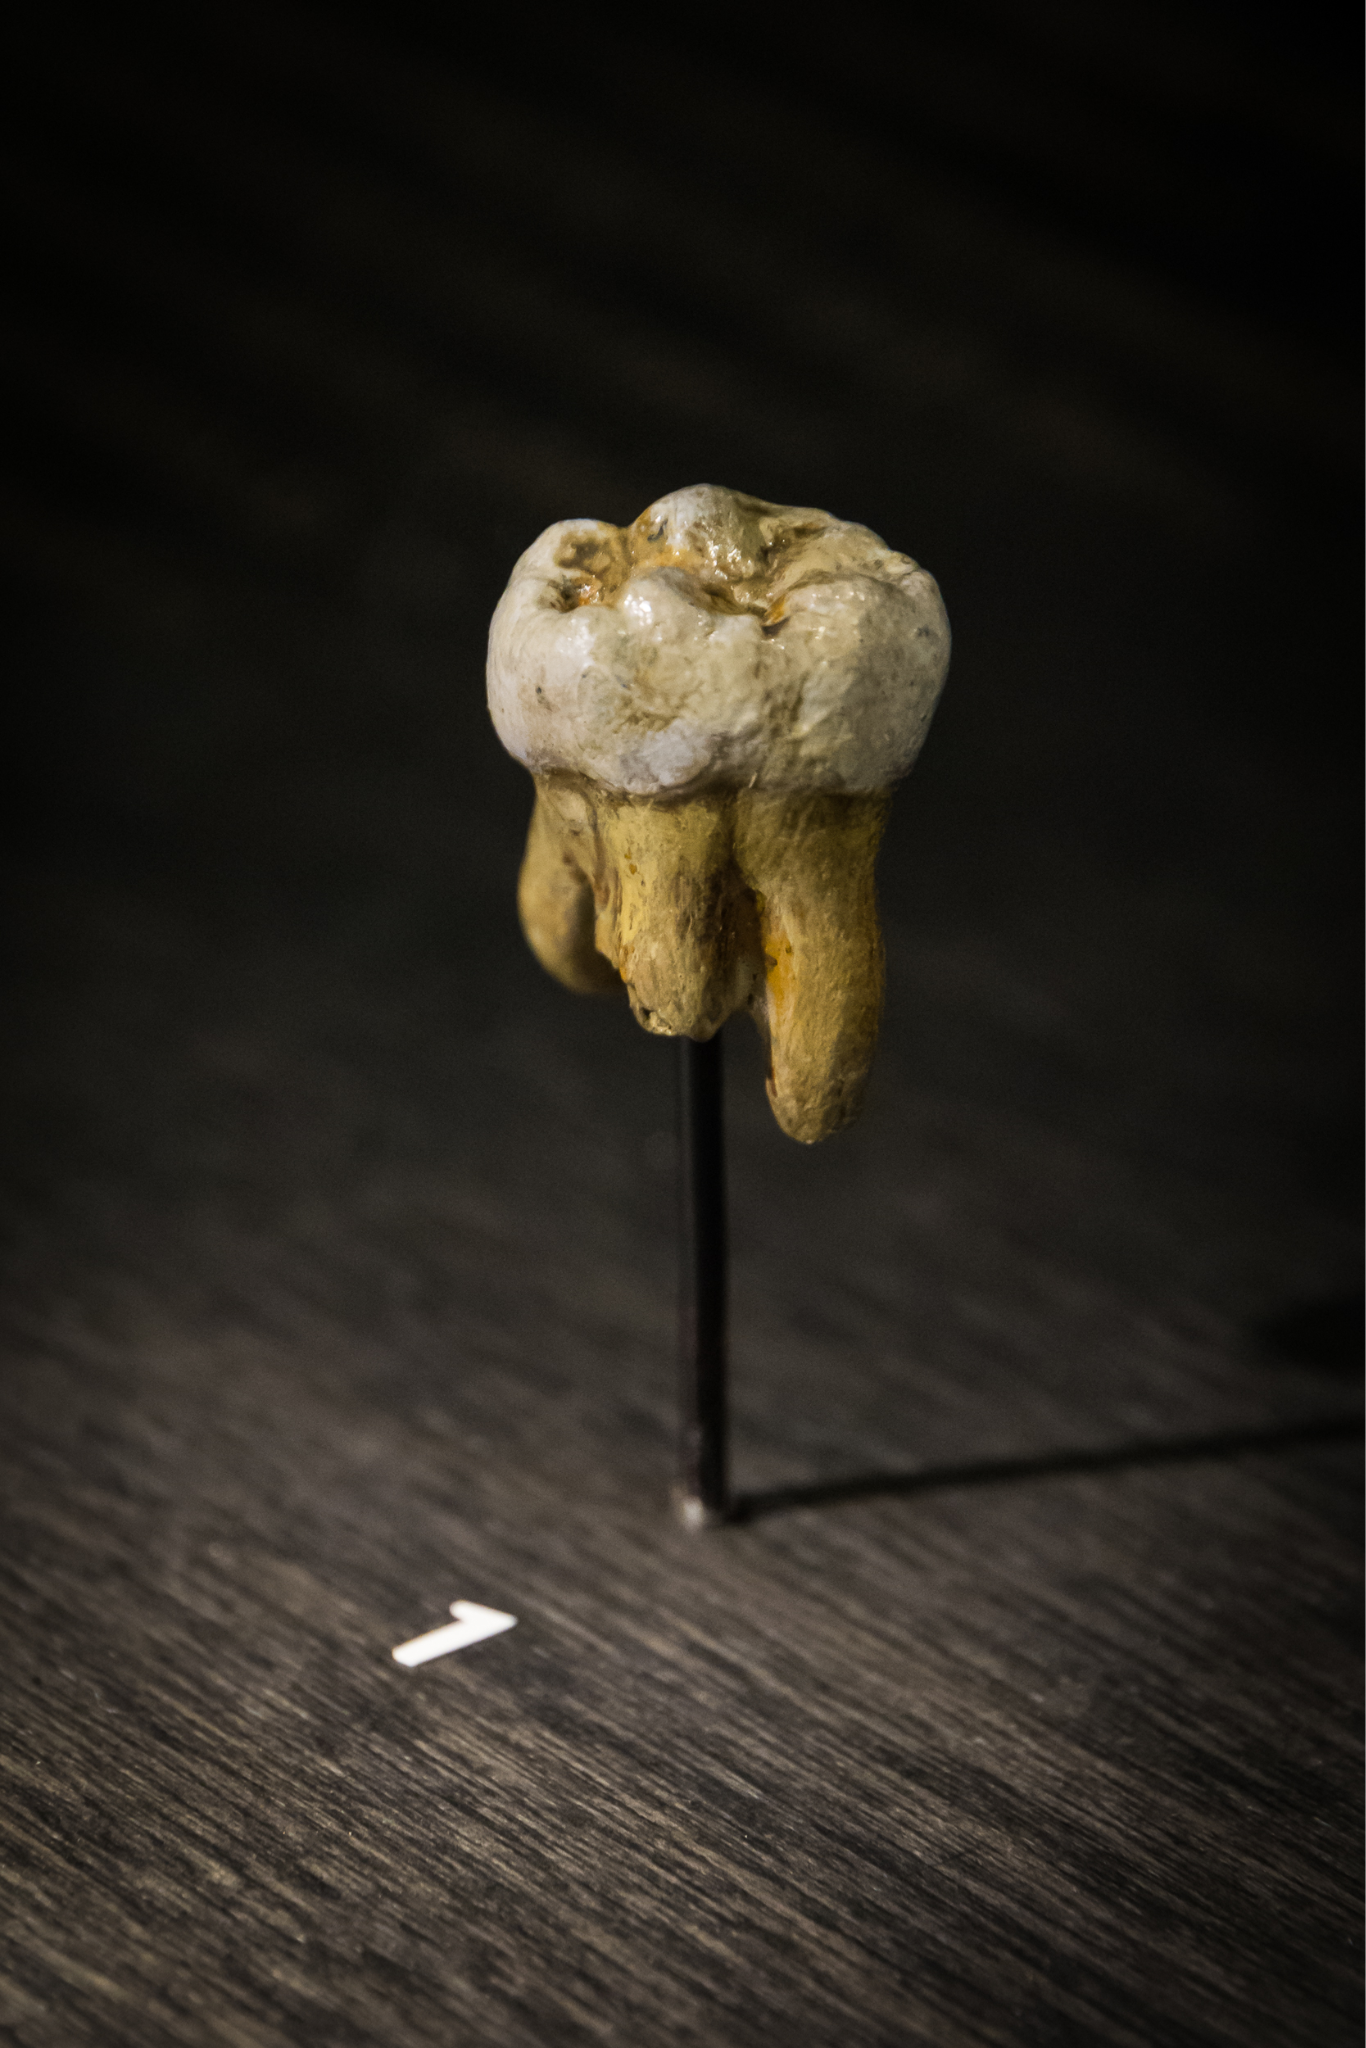 Molar tooth with wear, large surface area, and large roots.